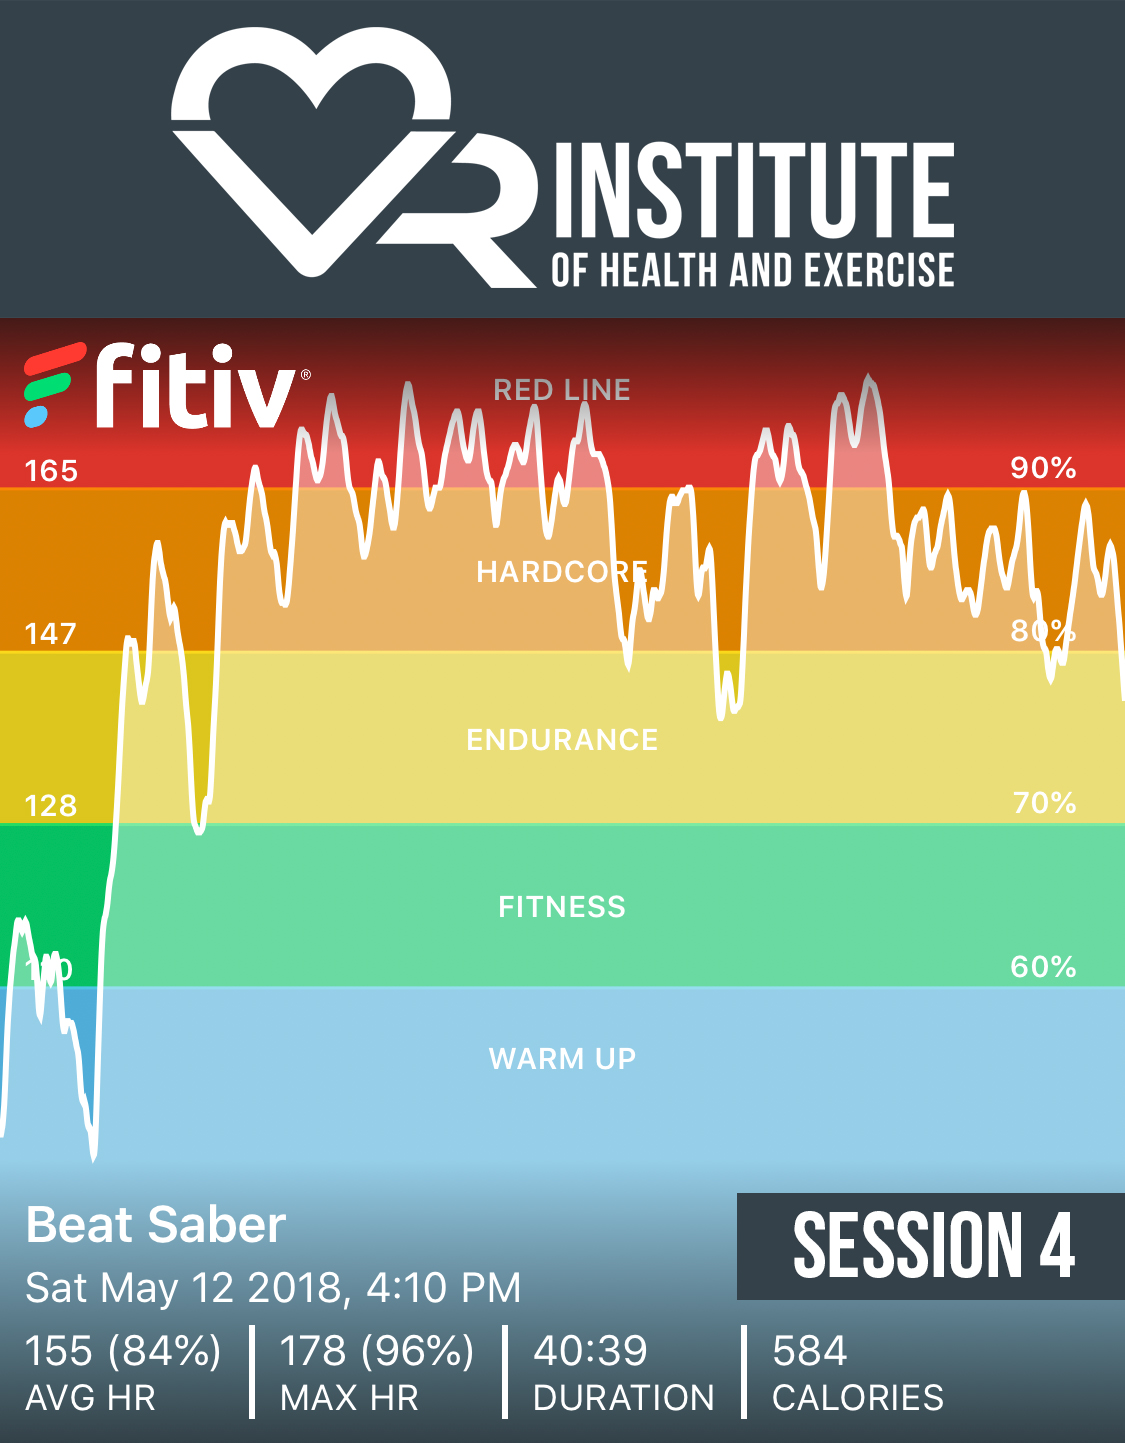 147 heart rate during exercise